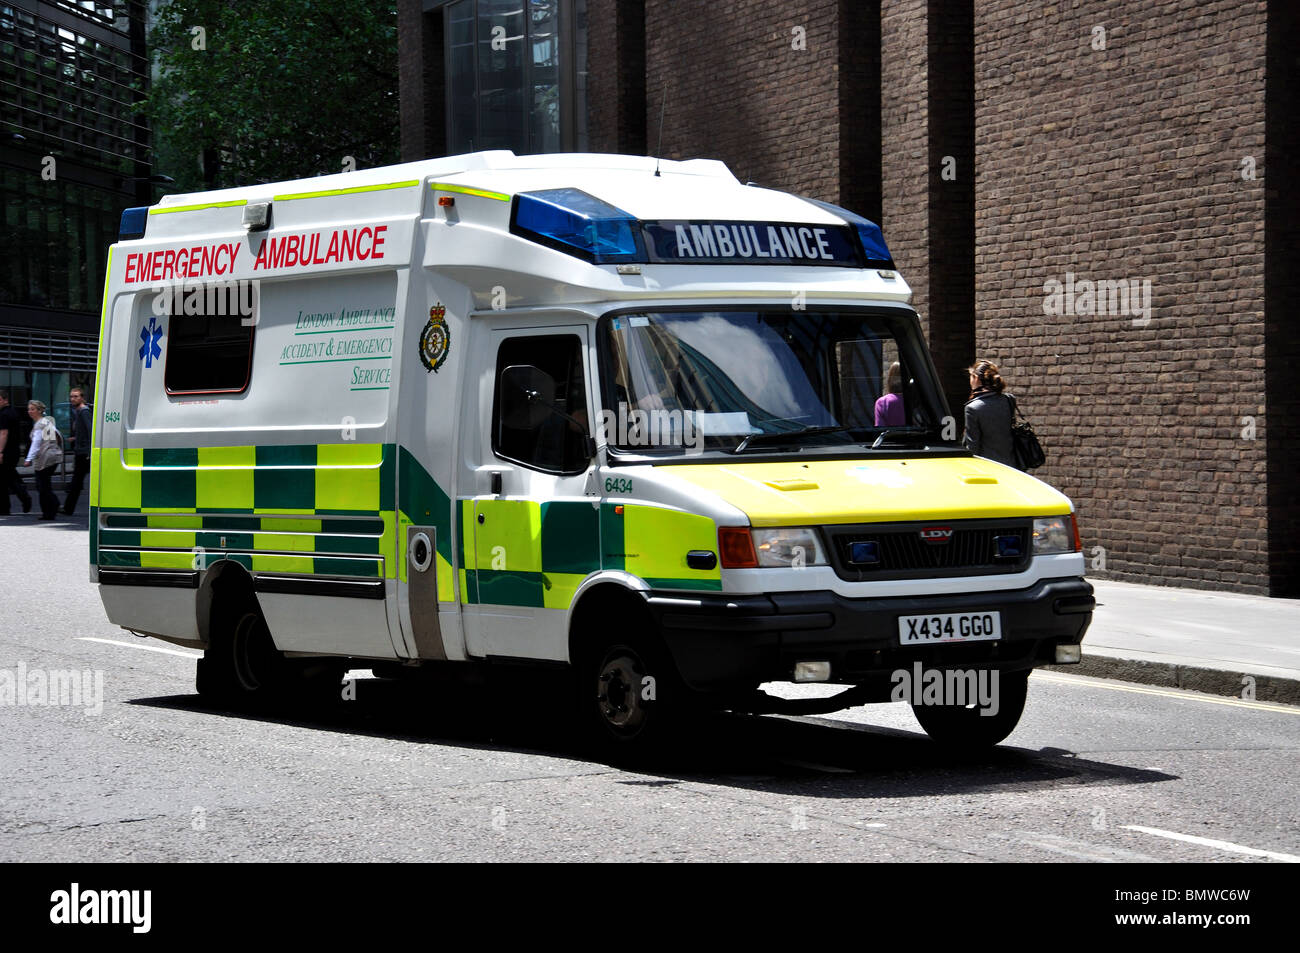 Ambulance sur appel, New Fetter Street, City of London, Greater London, Angleterre, Royaume-Uni Banque D'Images